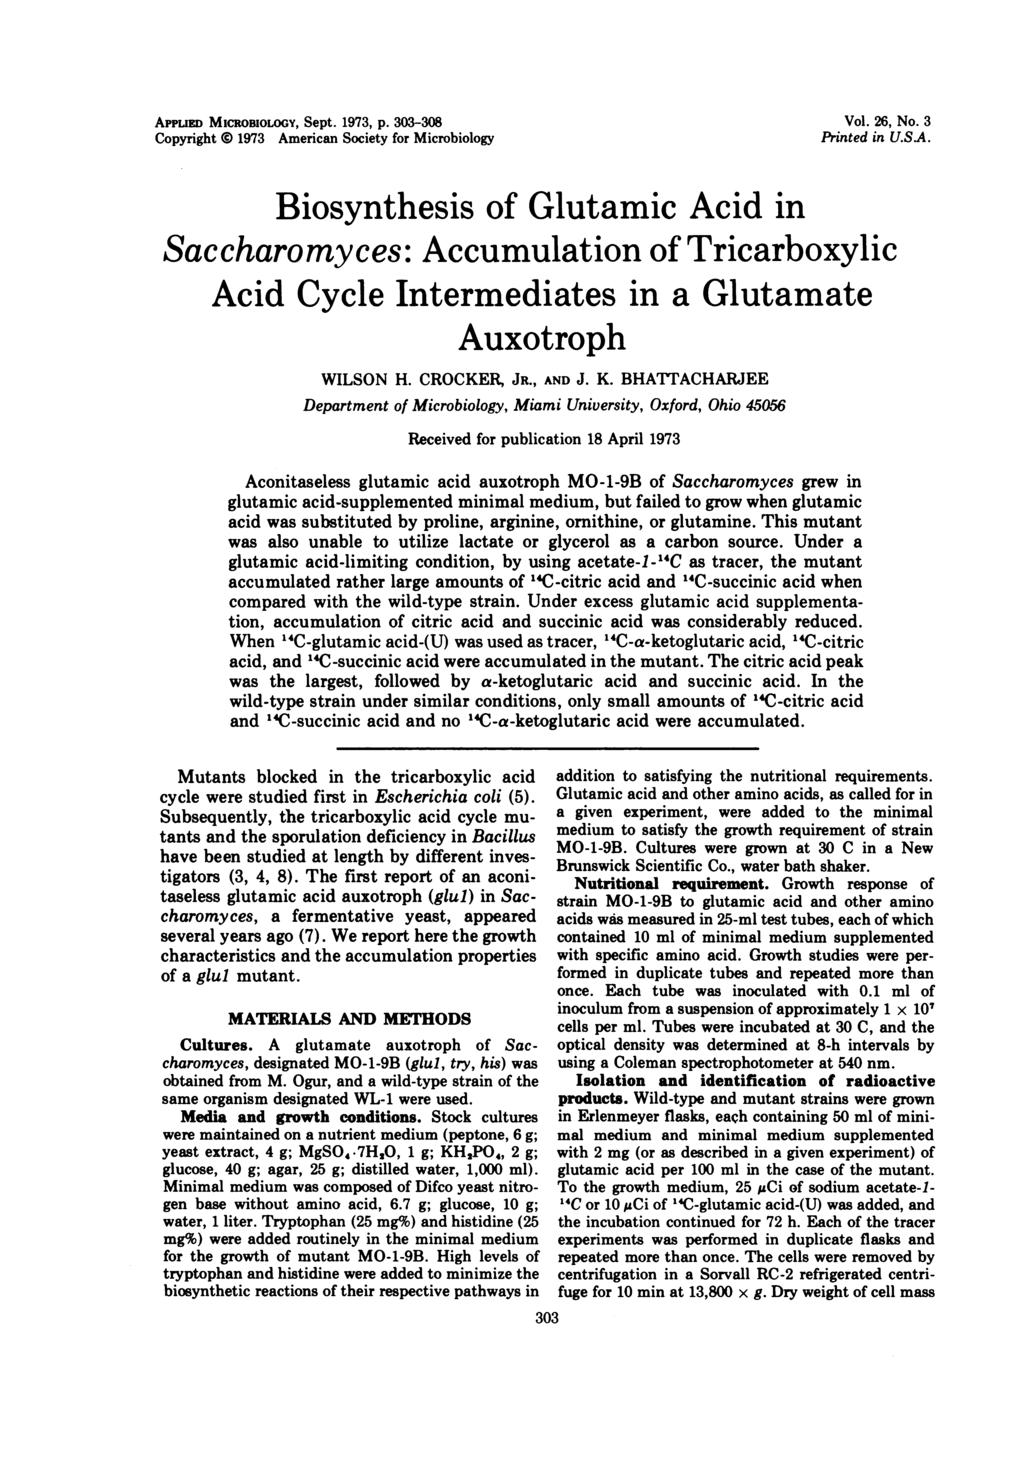 APPLIE MICROBIOLOGY, Sept. 1973, p. 33-38 Vol. 26, No. 3 Copyright 1973 American Society for Microbiology Printed in USA.